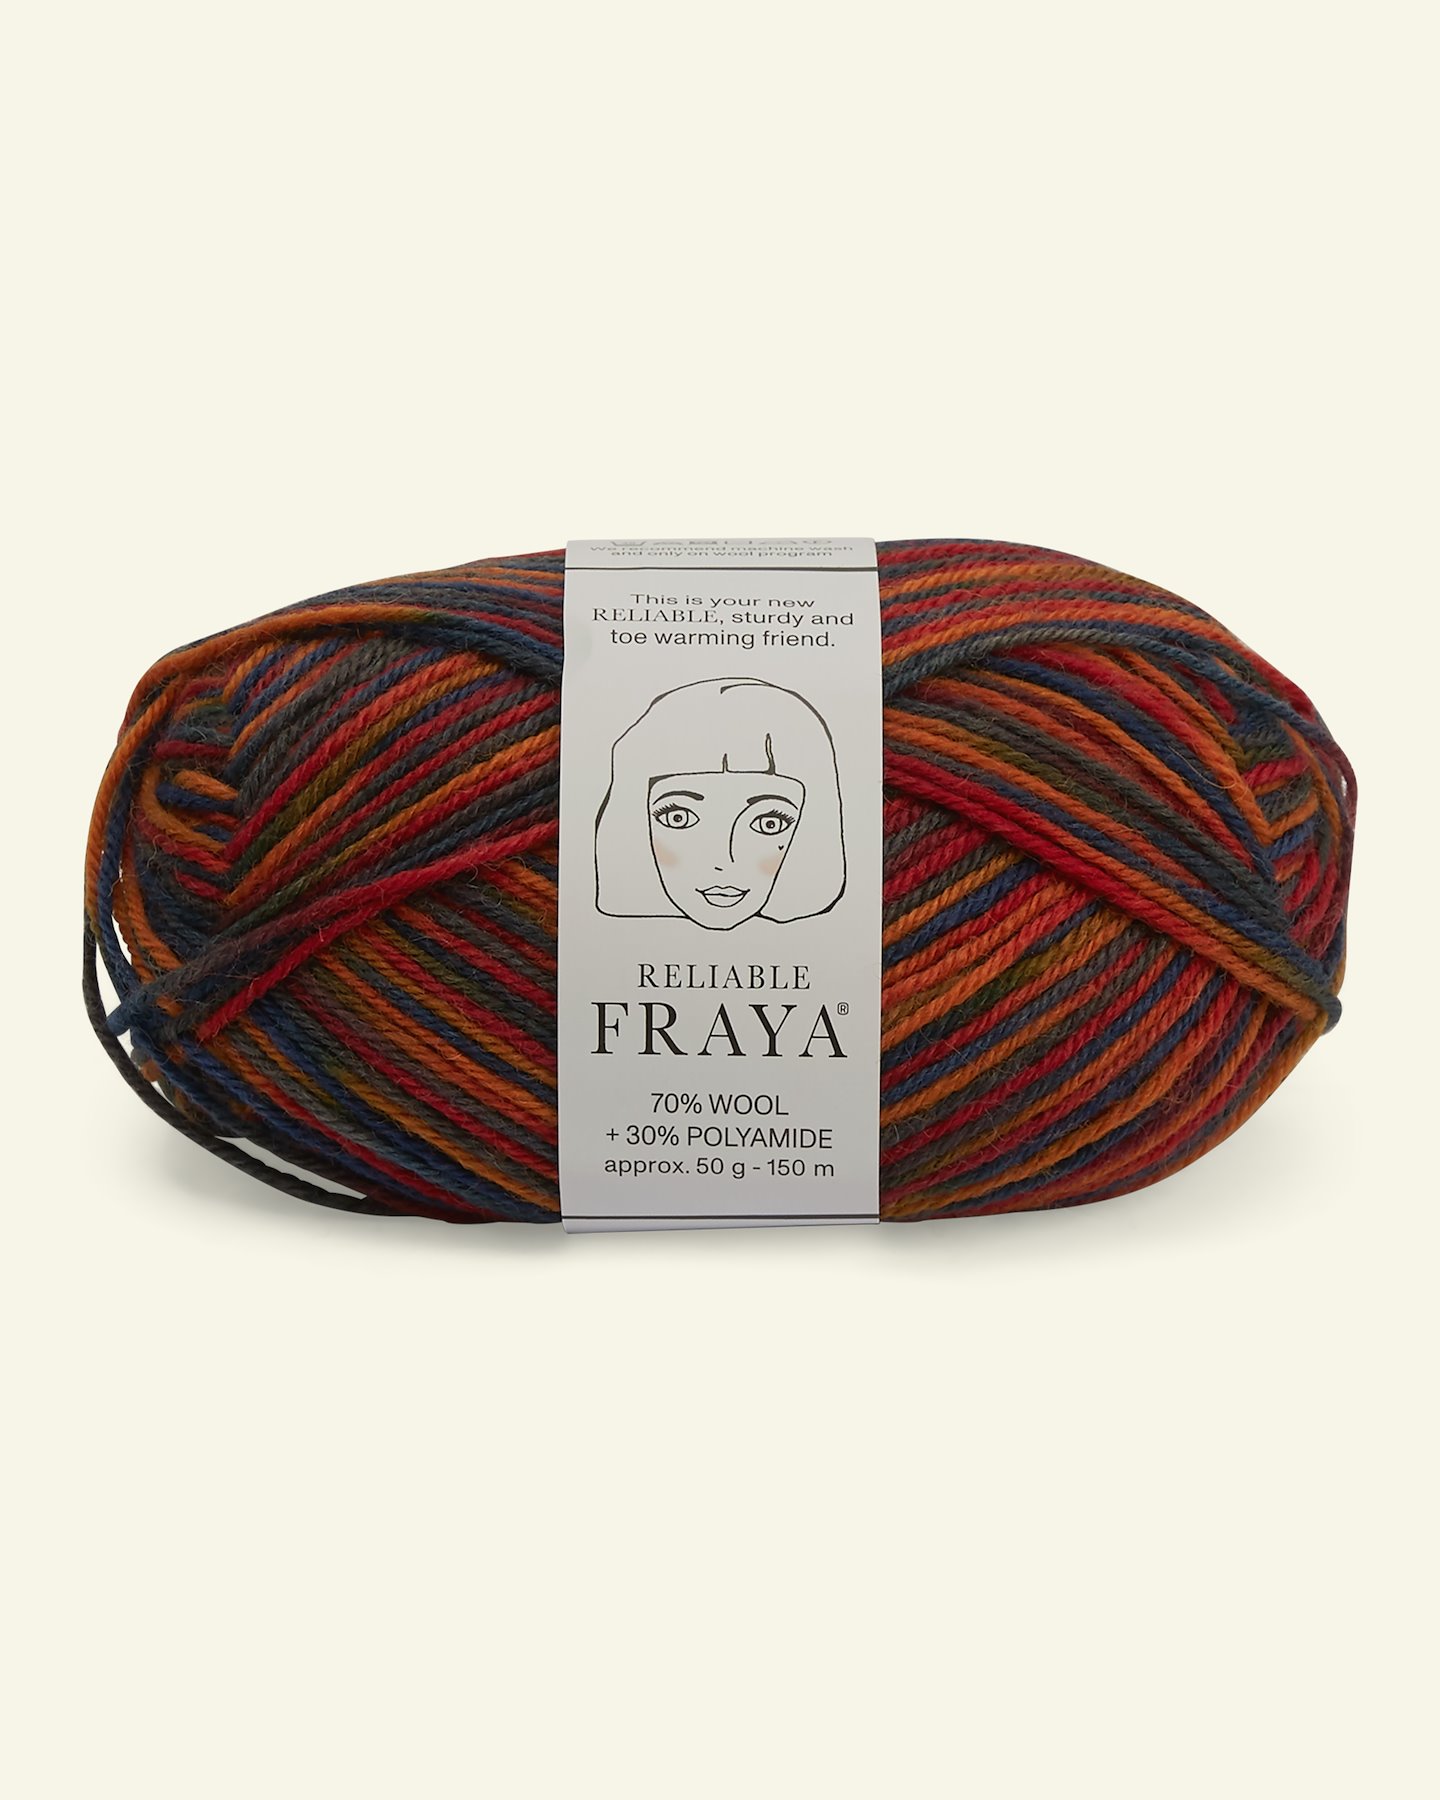 FRAYA, wool yarn "Reliable", red/petrol mix col. 90001200_pack